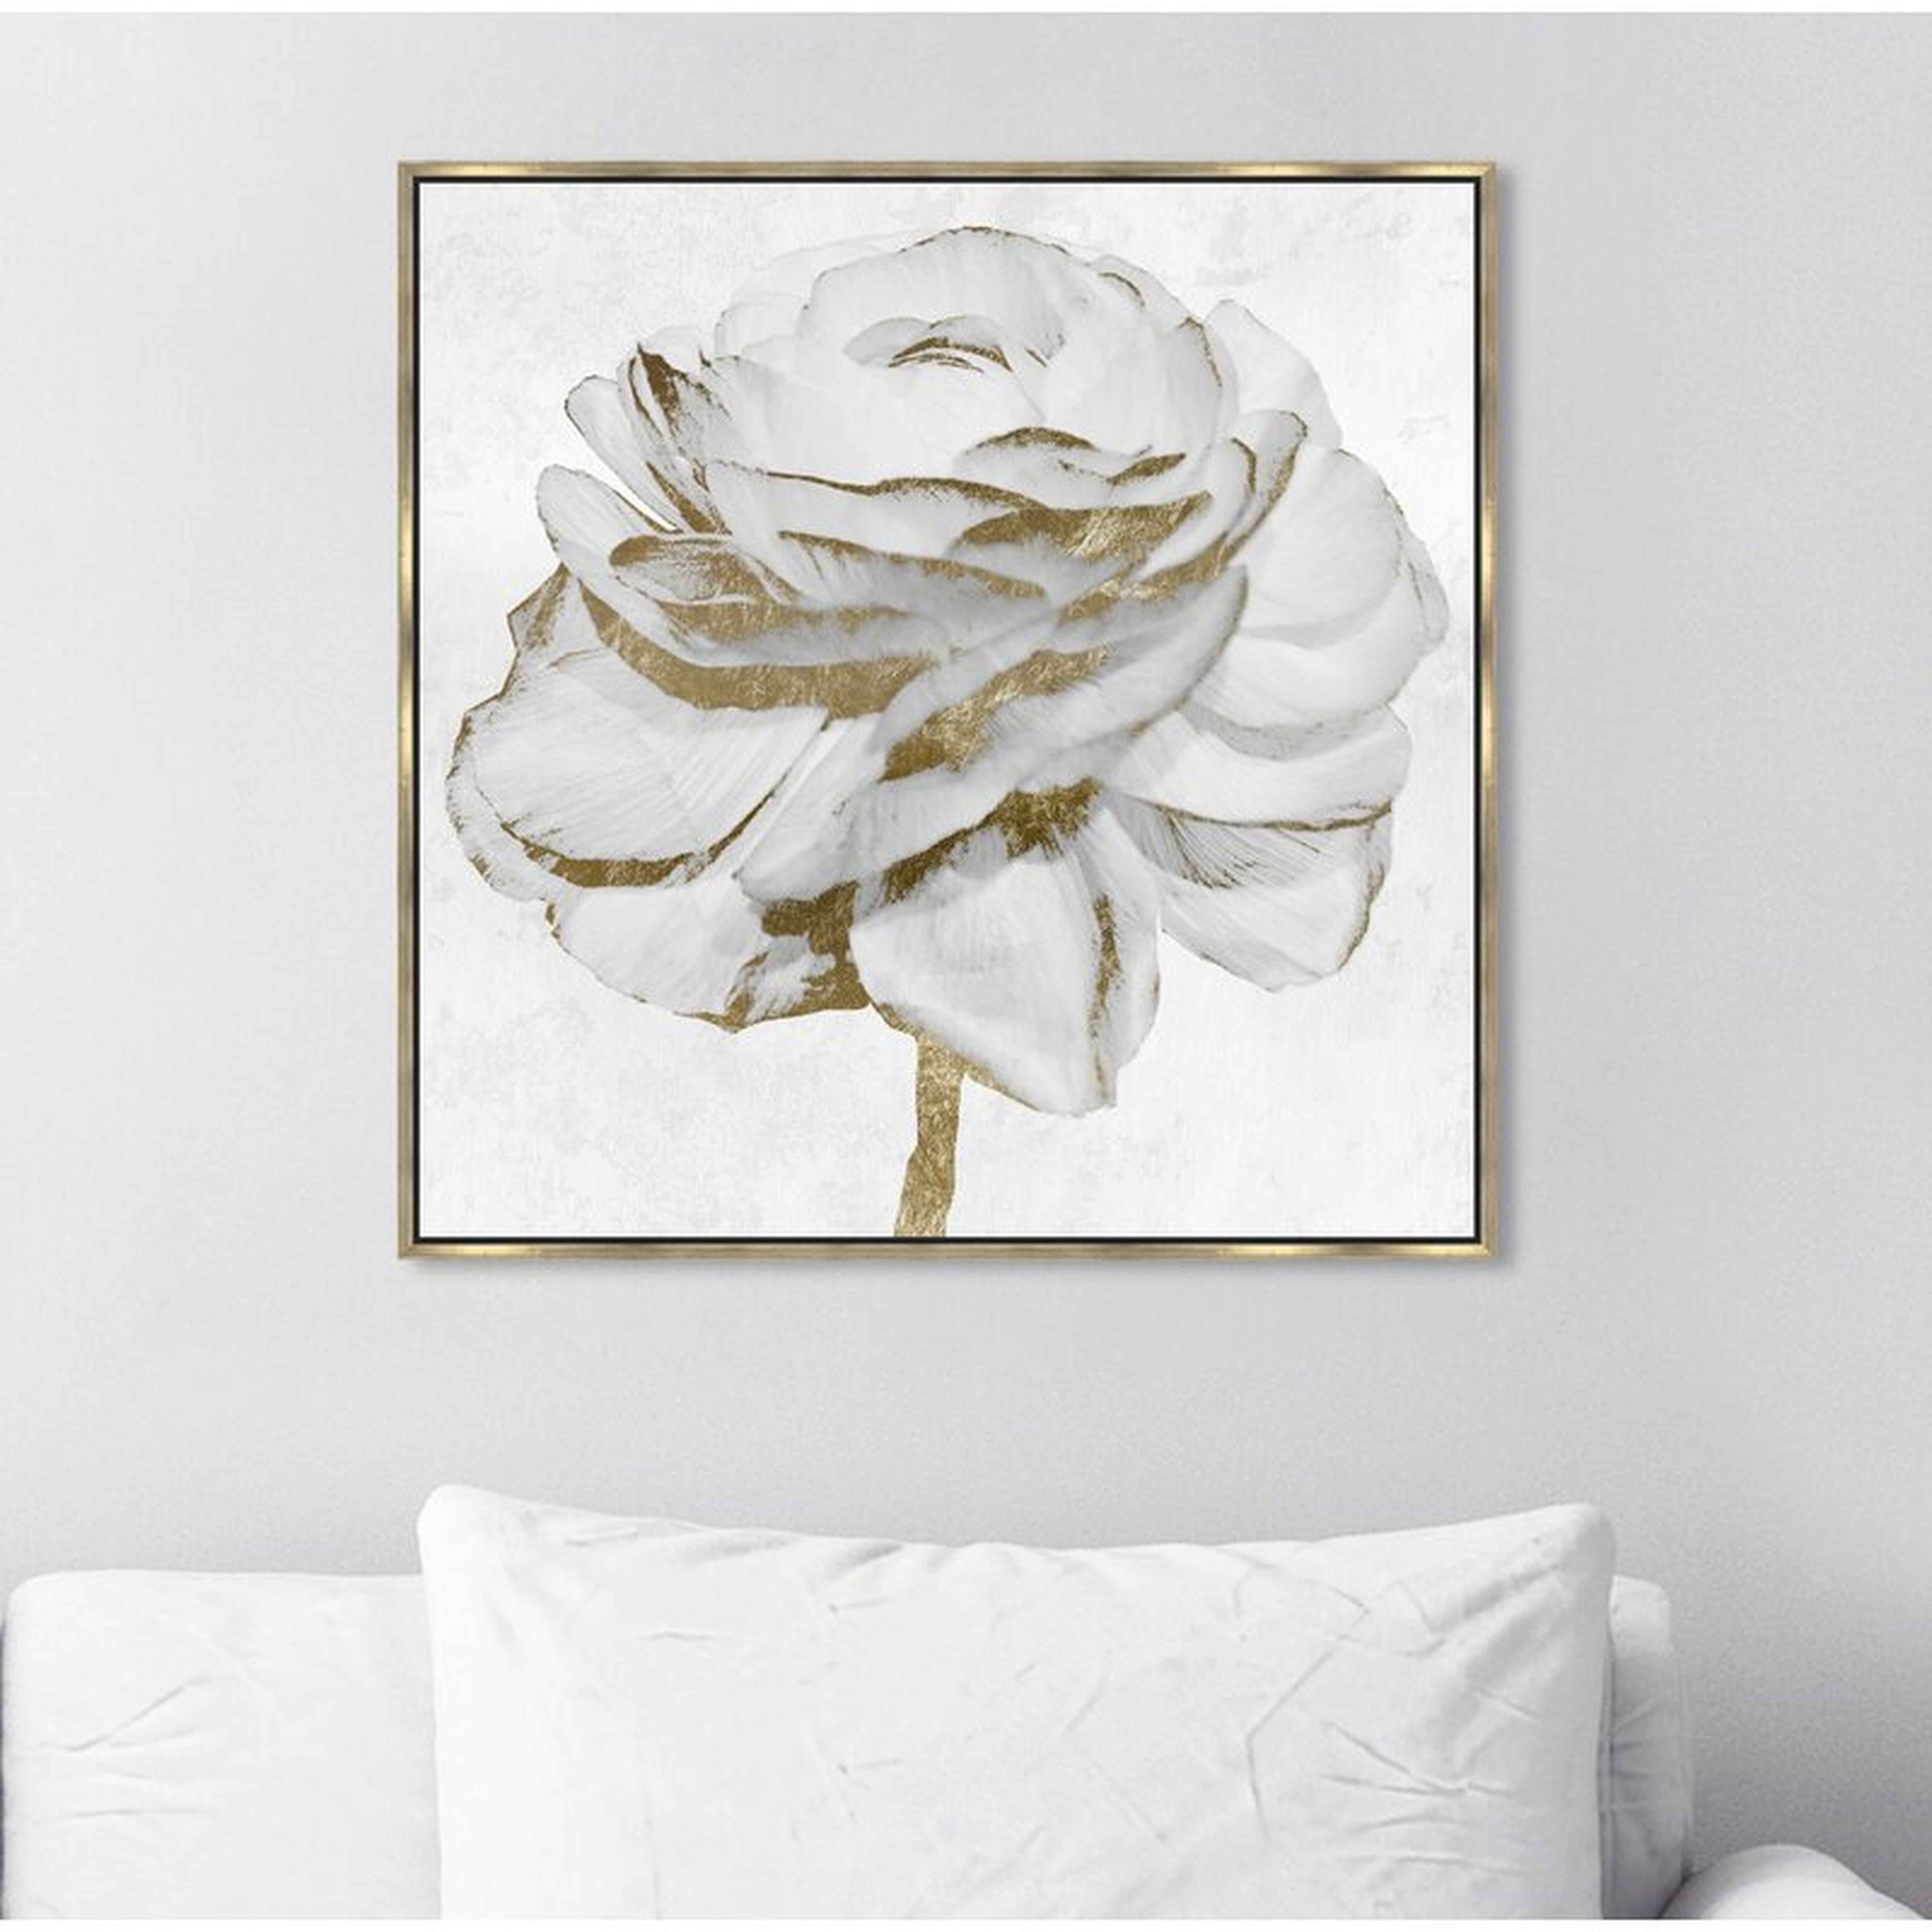 Oliver Gal Signature 'White Gold Peony' Graphic Art Print on Wrapped Canvas Size: 24" H x 24" W x 1.5" D - Perigold